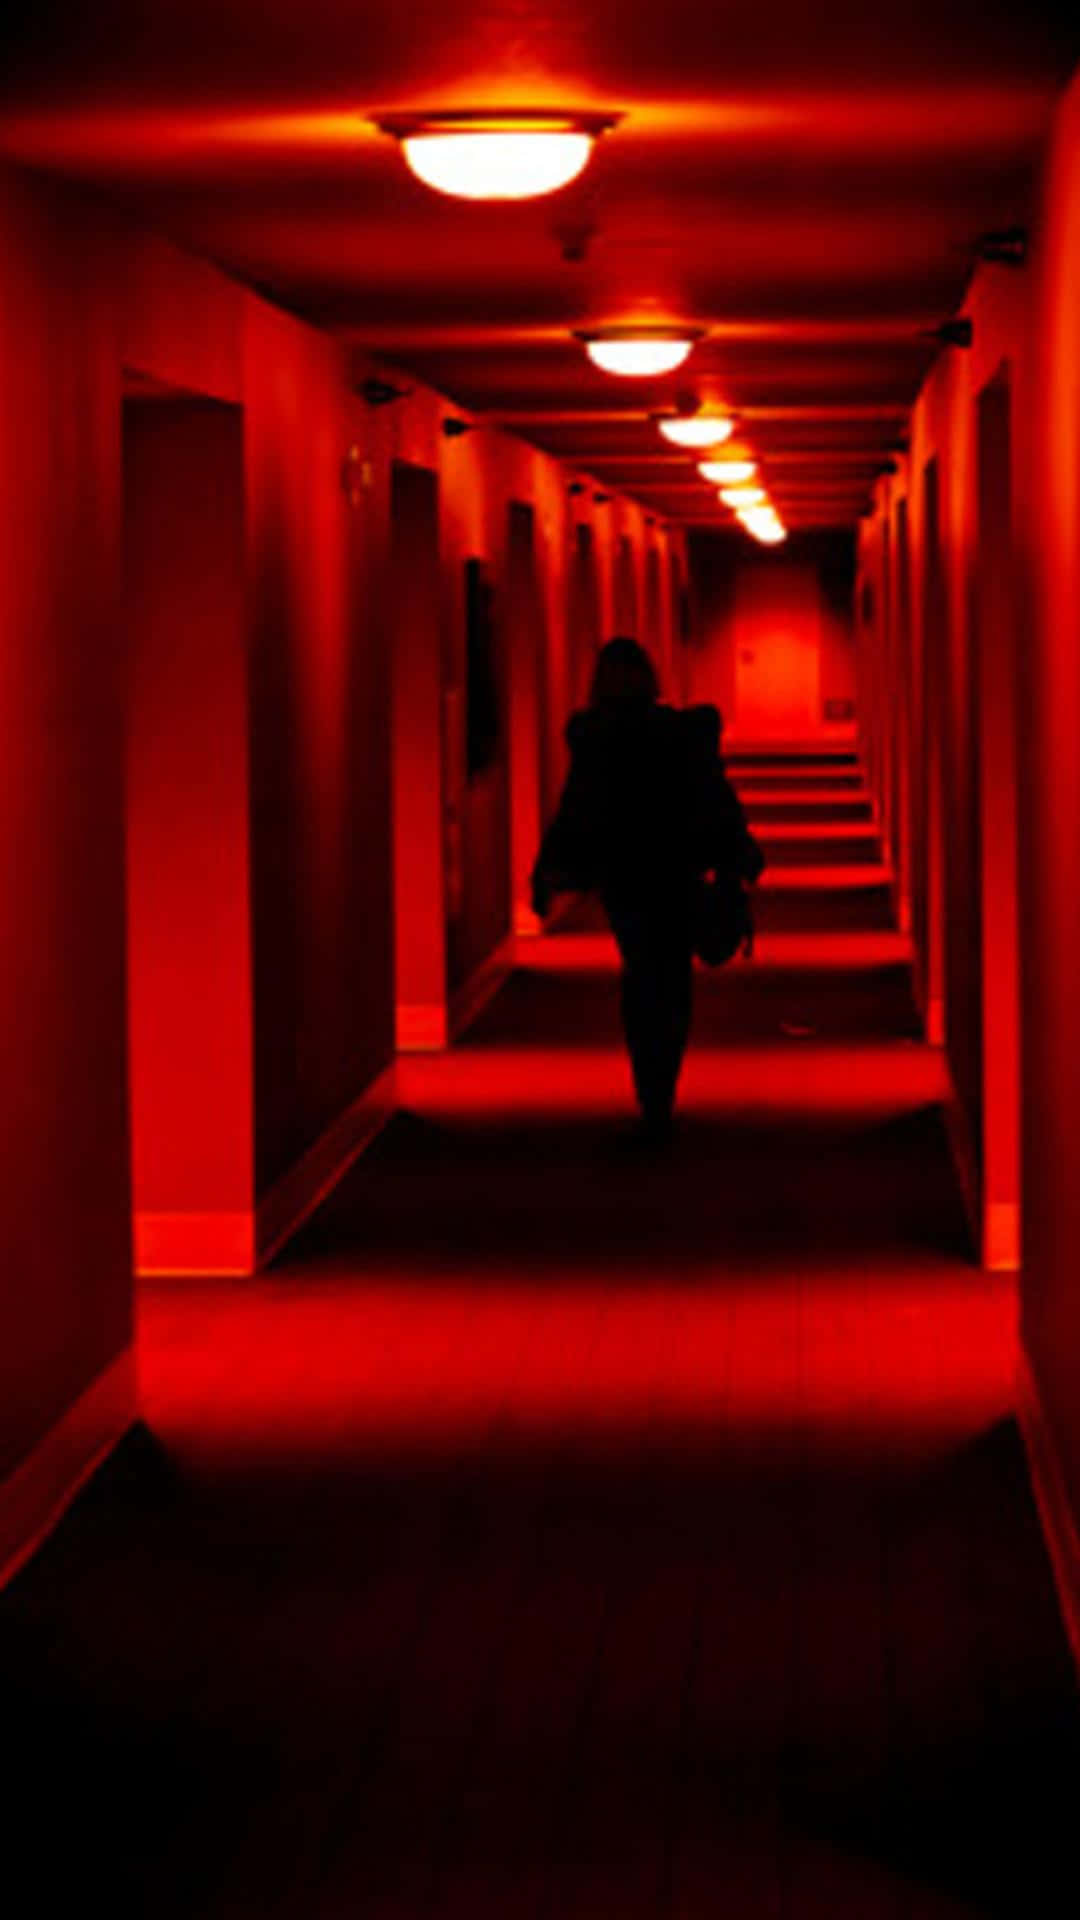 A Person Walking Down A Hallway With Red Lights